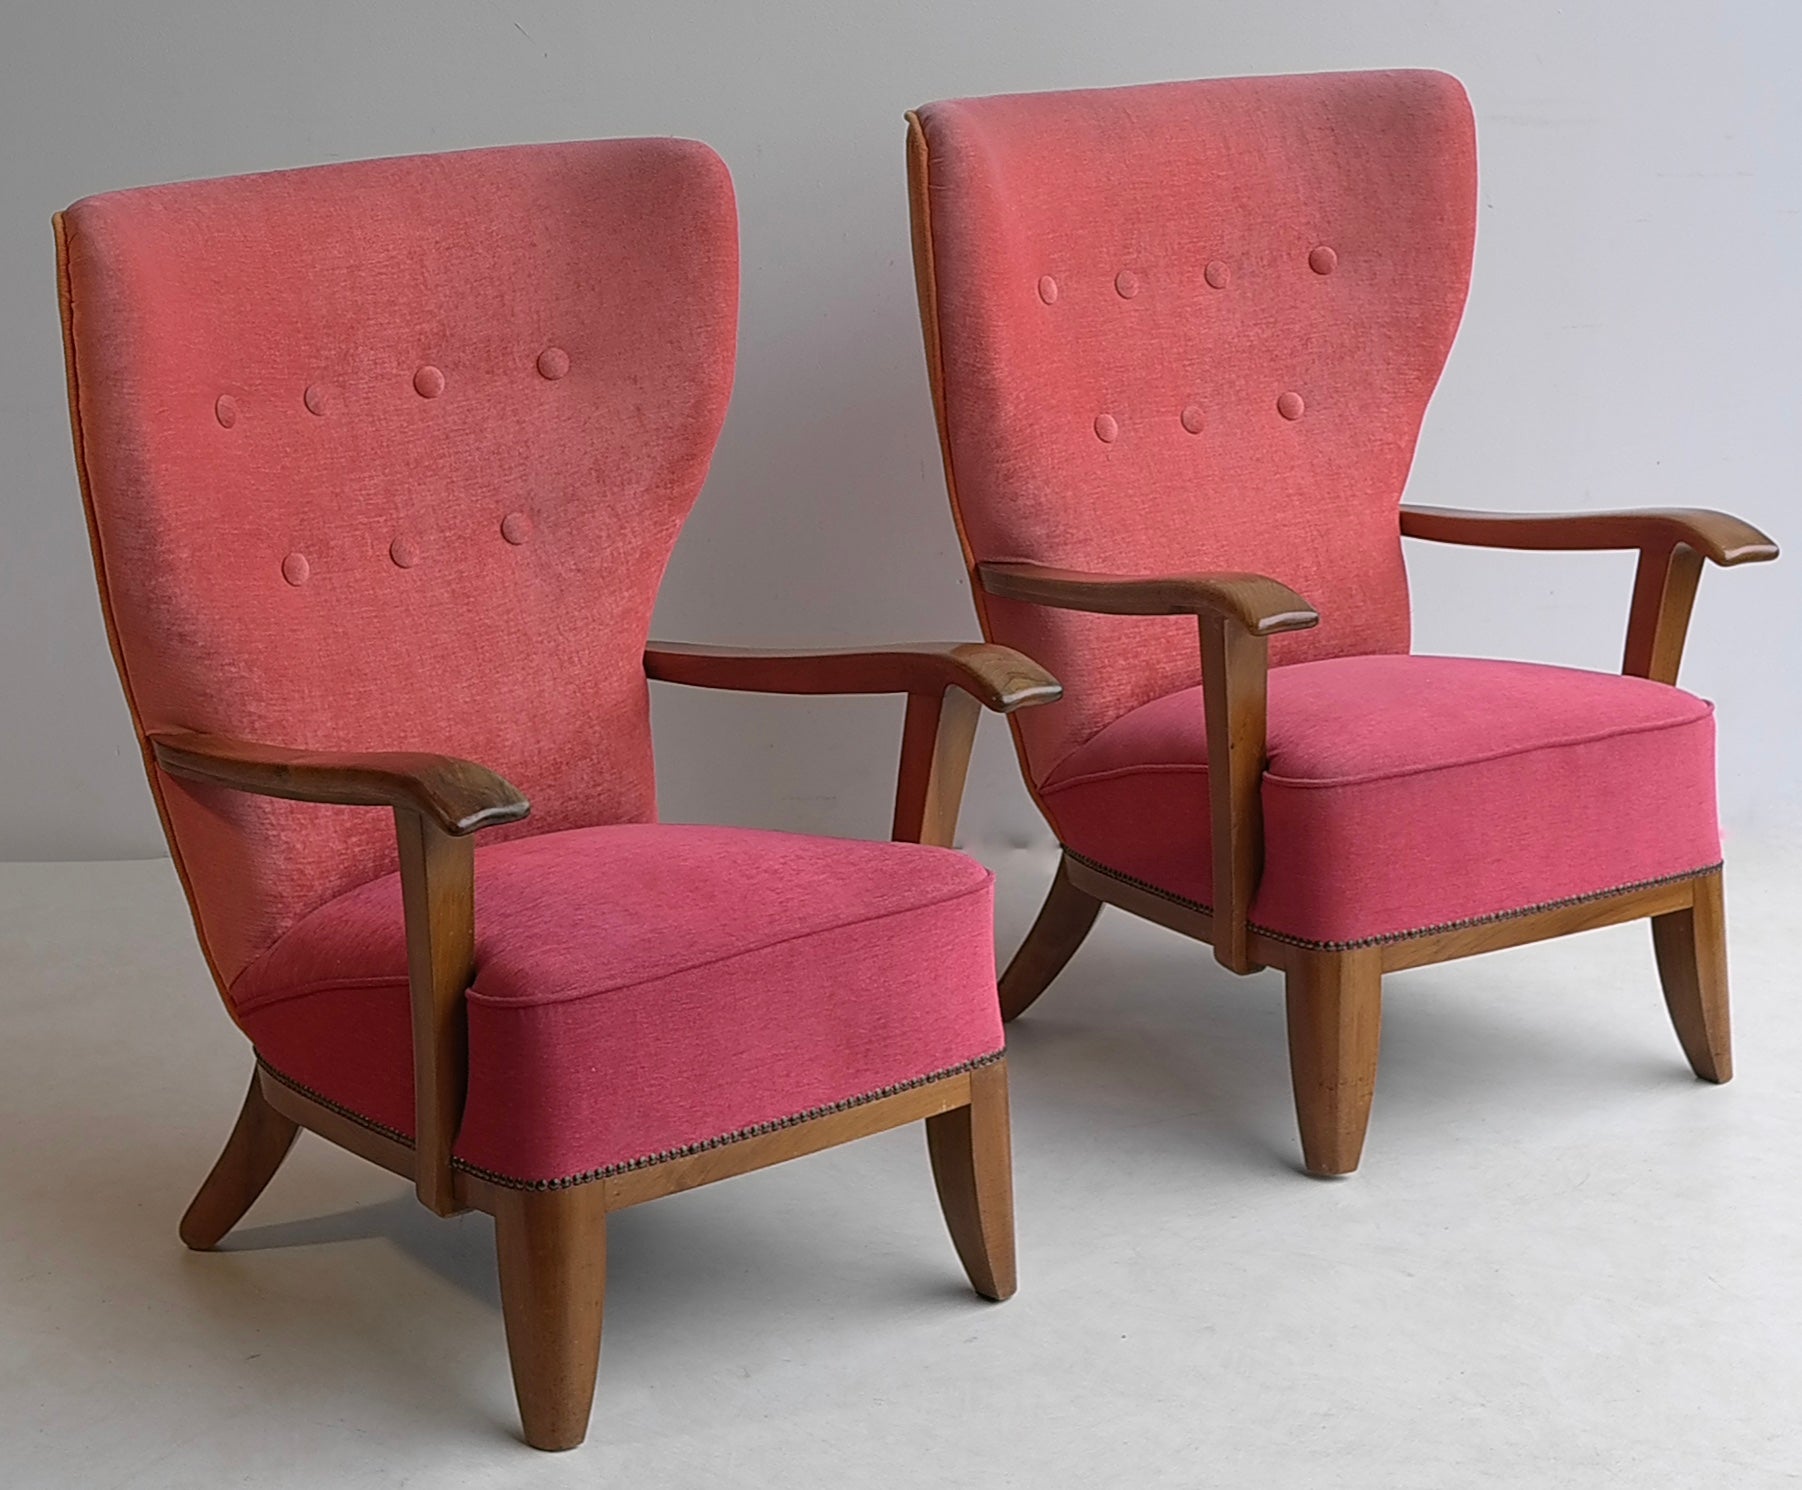 Pair of three-tone Mid-Century Modern Wingback armchairs, France 1948

These chairs has been newly upholstered a couple of years ago. They have new filling and springs and new upholstery in three colors. The color orange in the back. A dark red